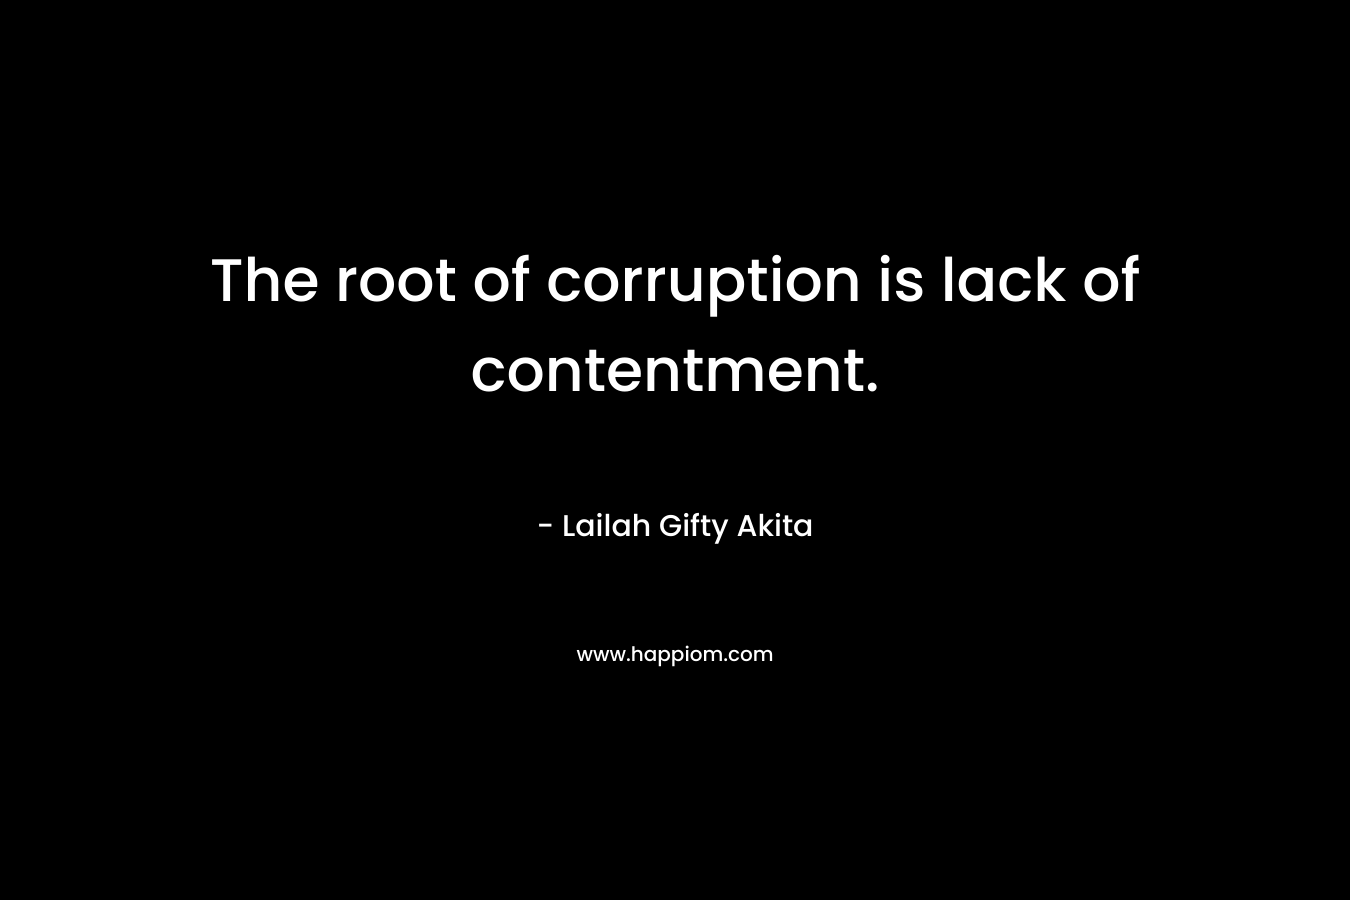 The root of corruption is lack of contentment.